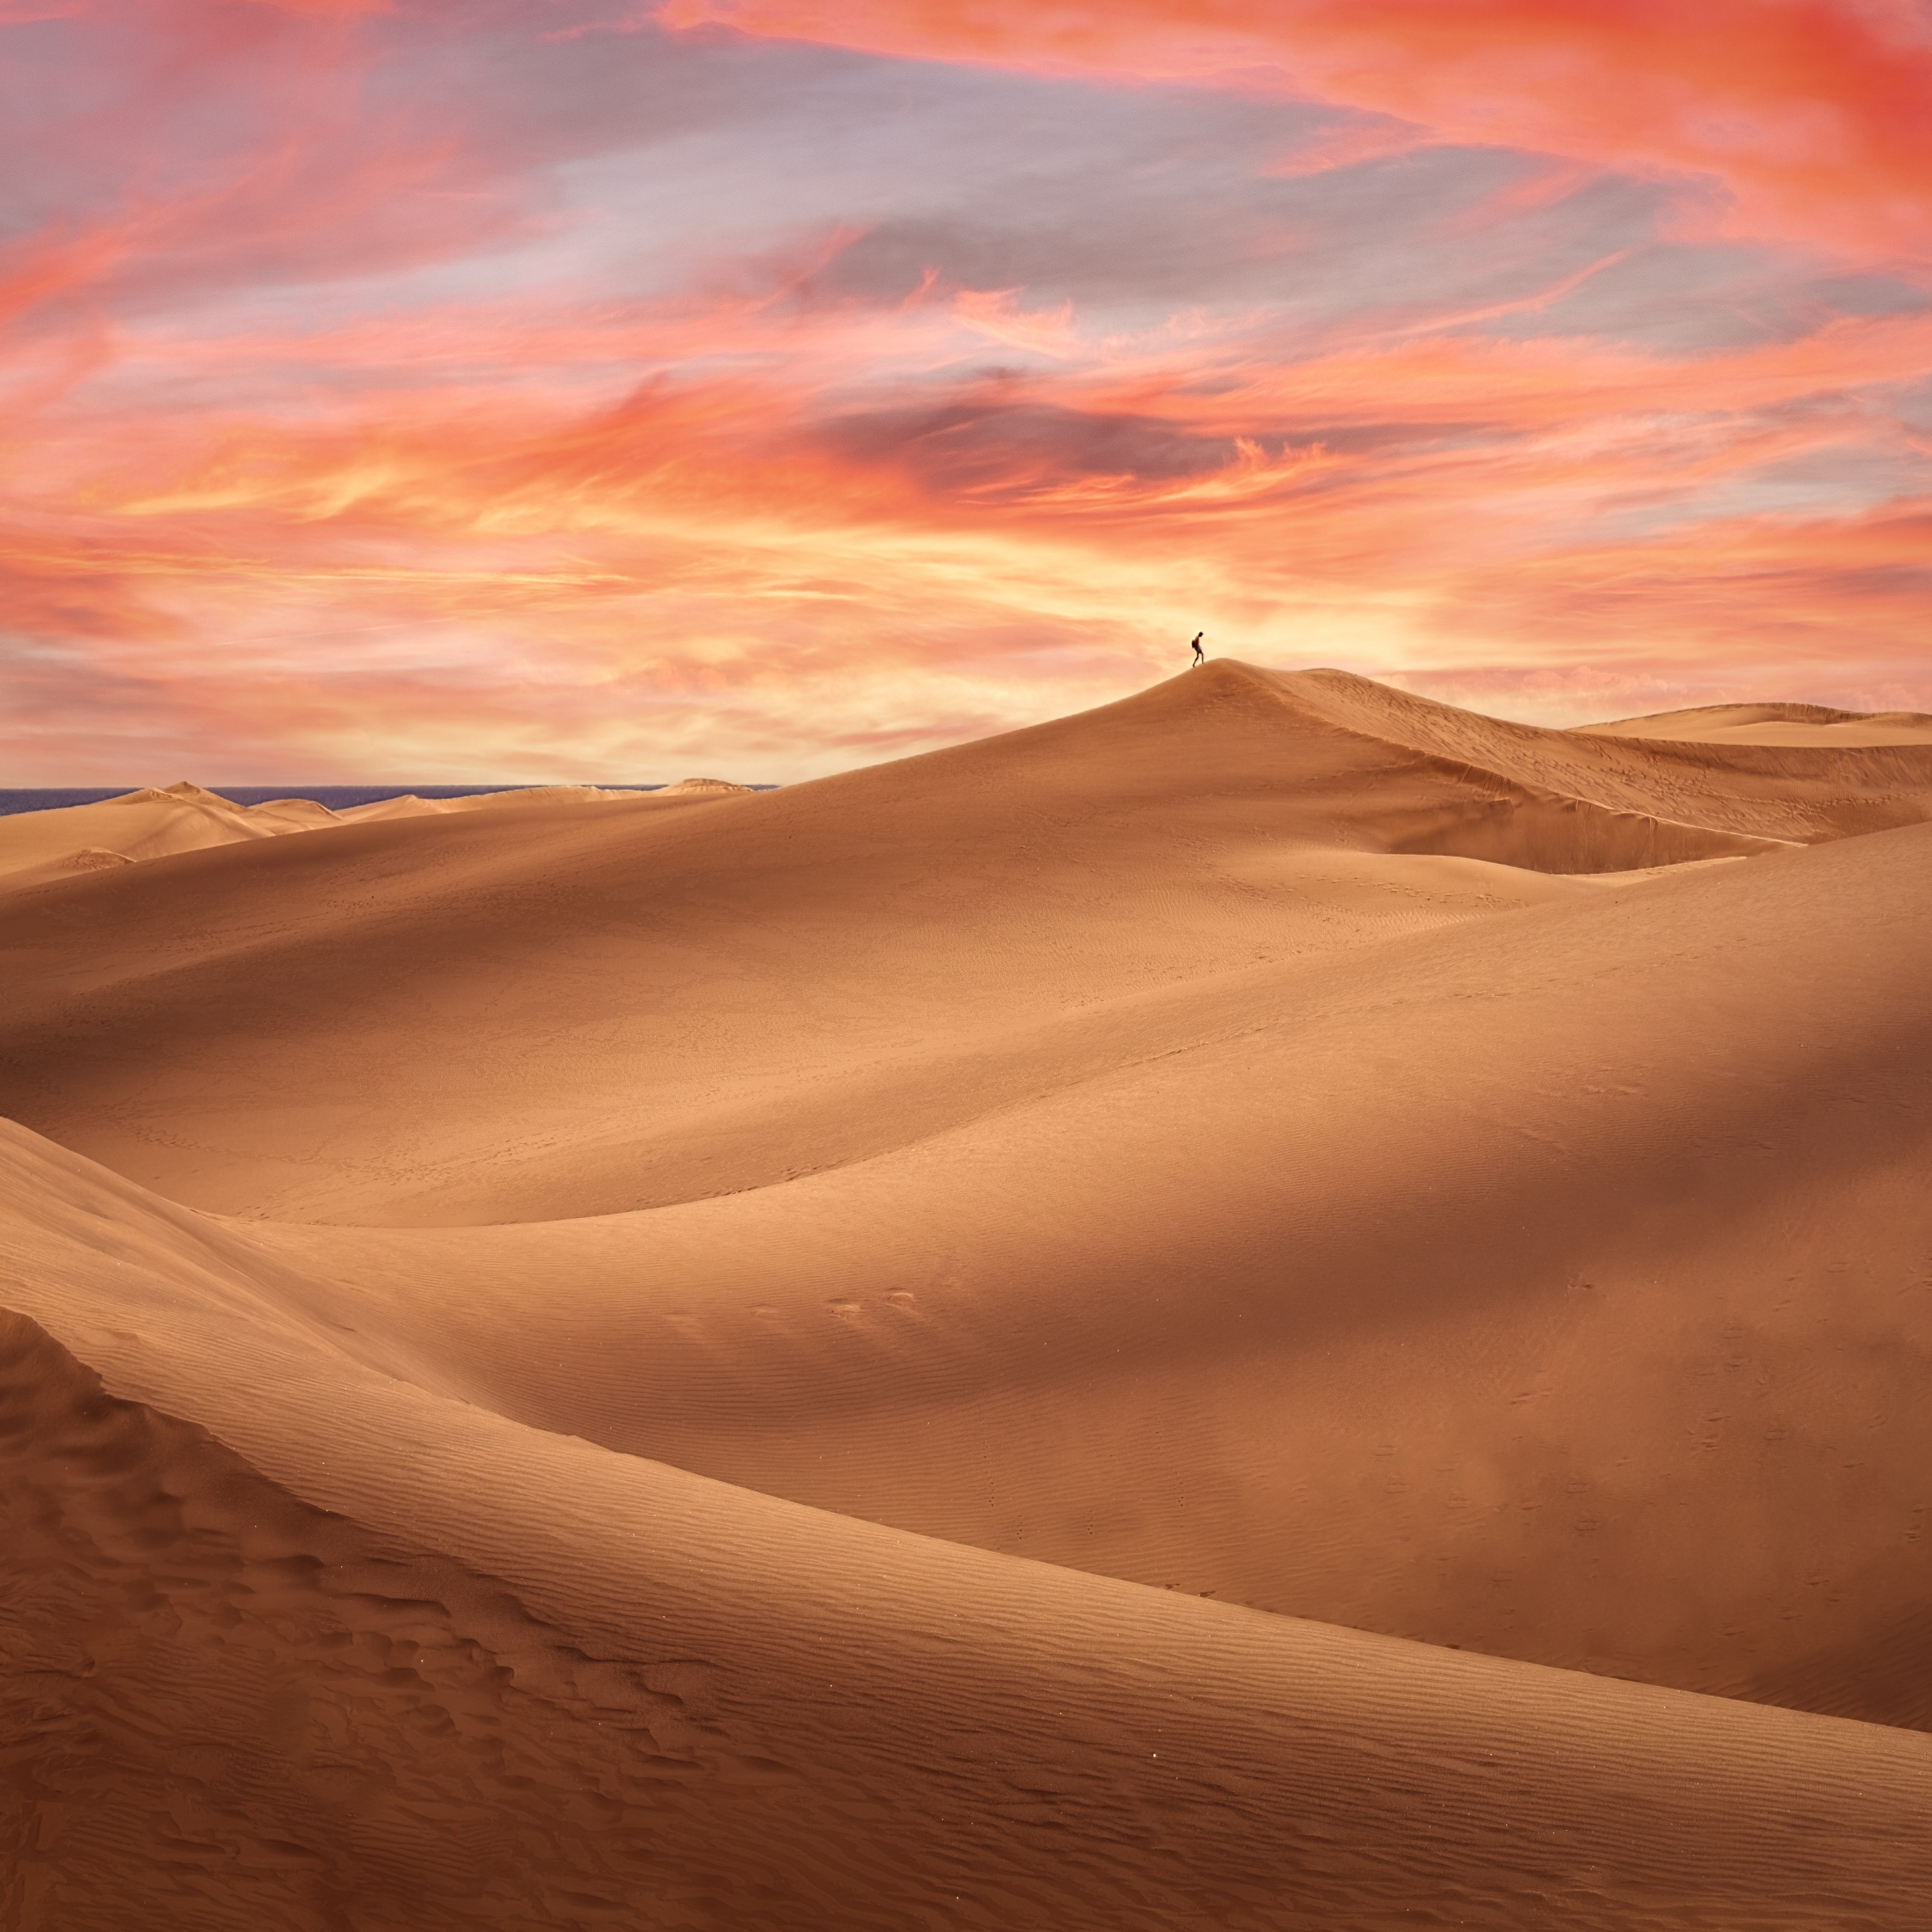 Download wallpaper 938x1668 desert sunset sand hills bushes iphone  876s6 for parallax hd background